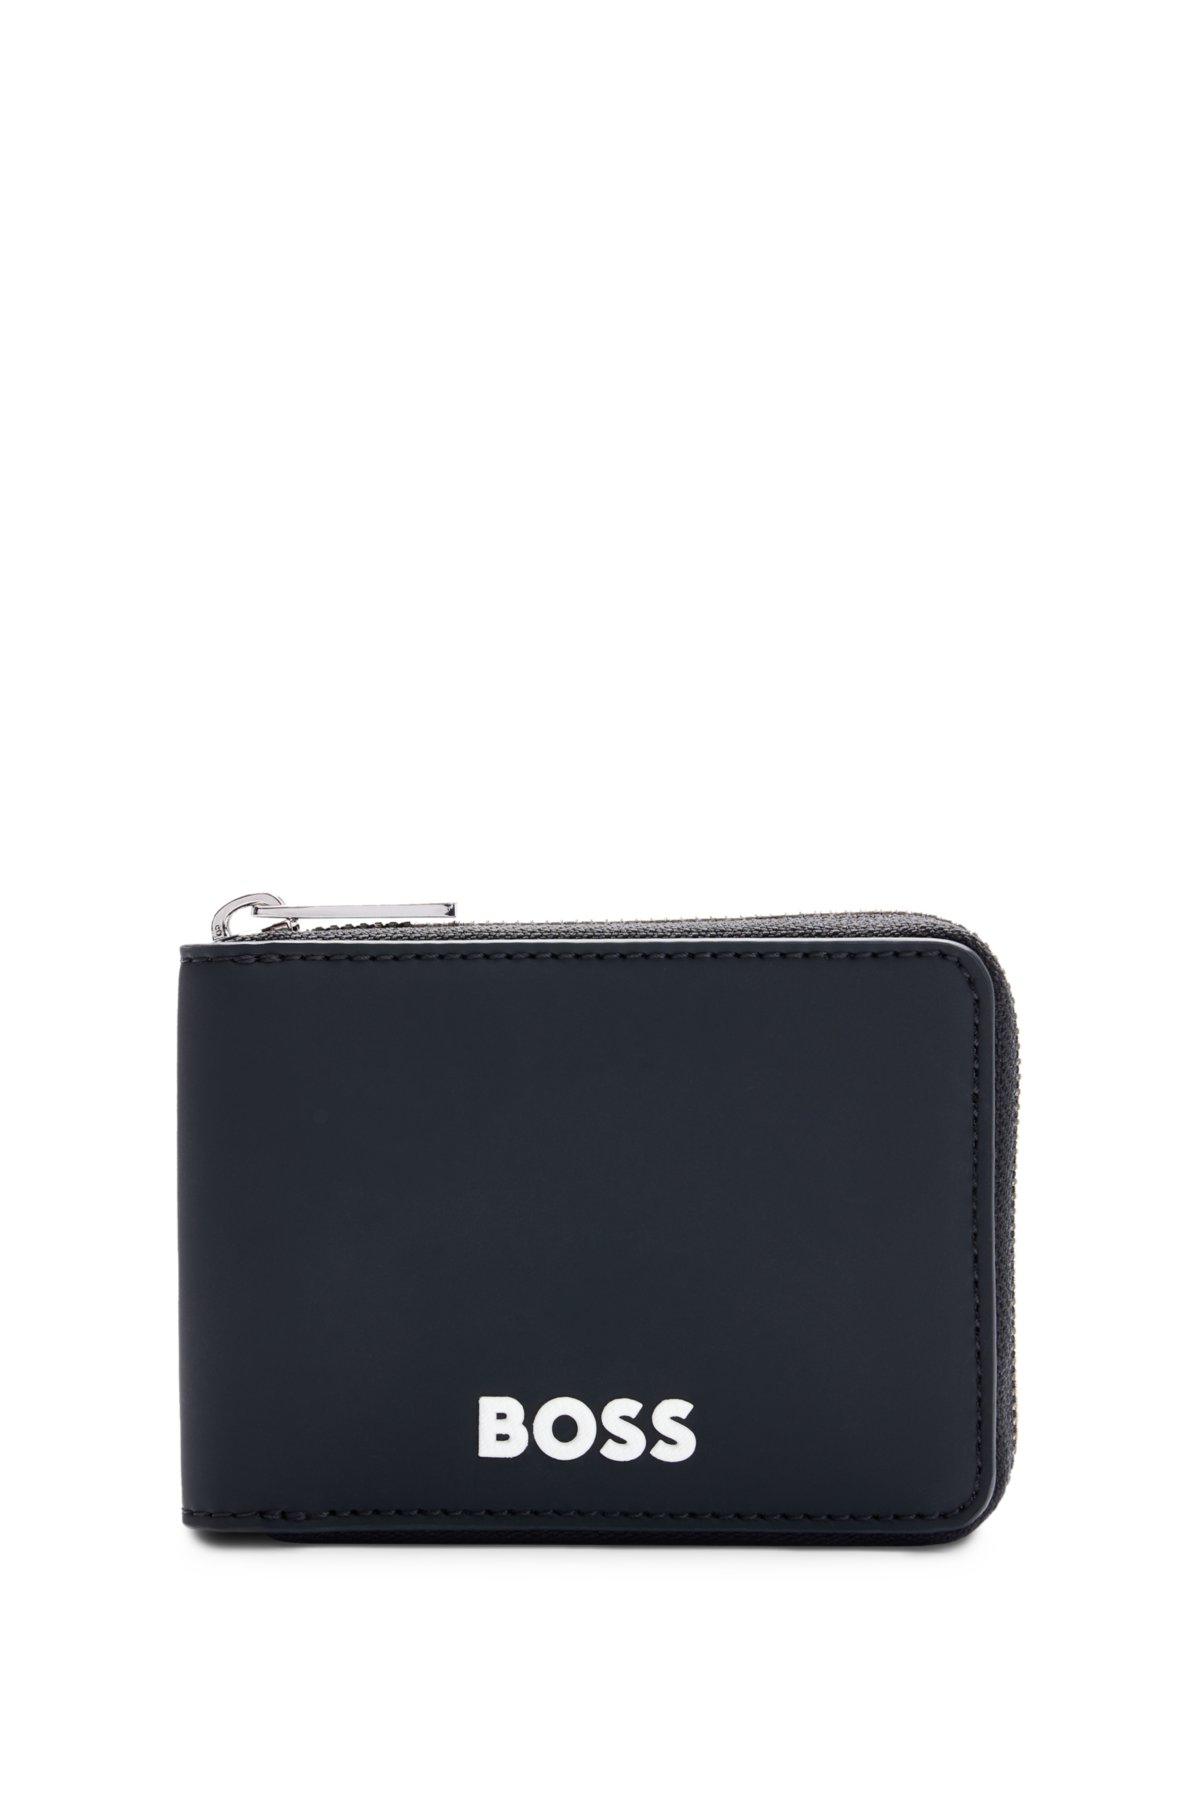 Faux-leather ziparound wallet with contrast logo, Black